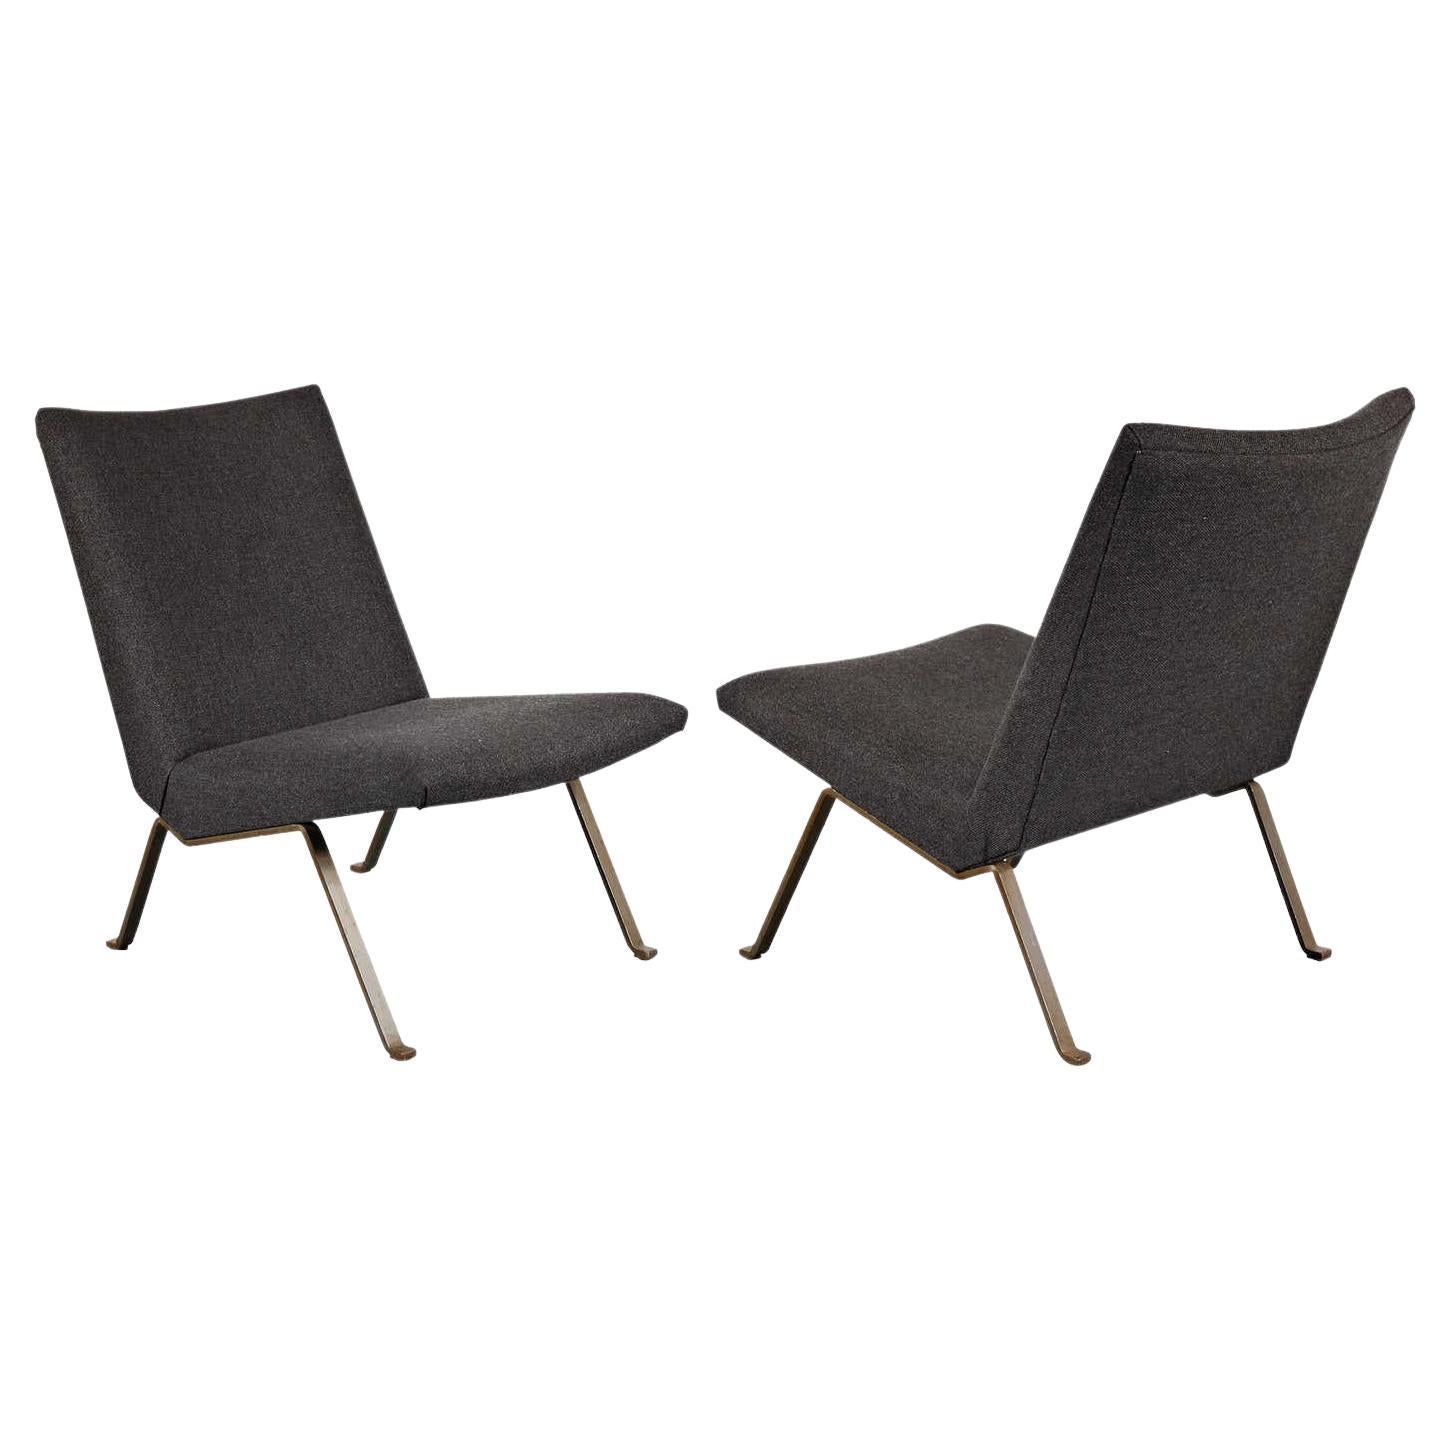 Midcentury Pair of Easy Chairs by Koene Oberman, circa 1950 For Sale